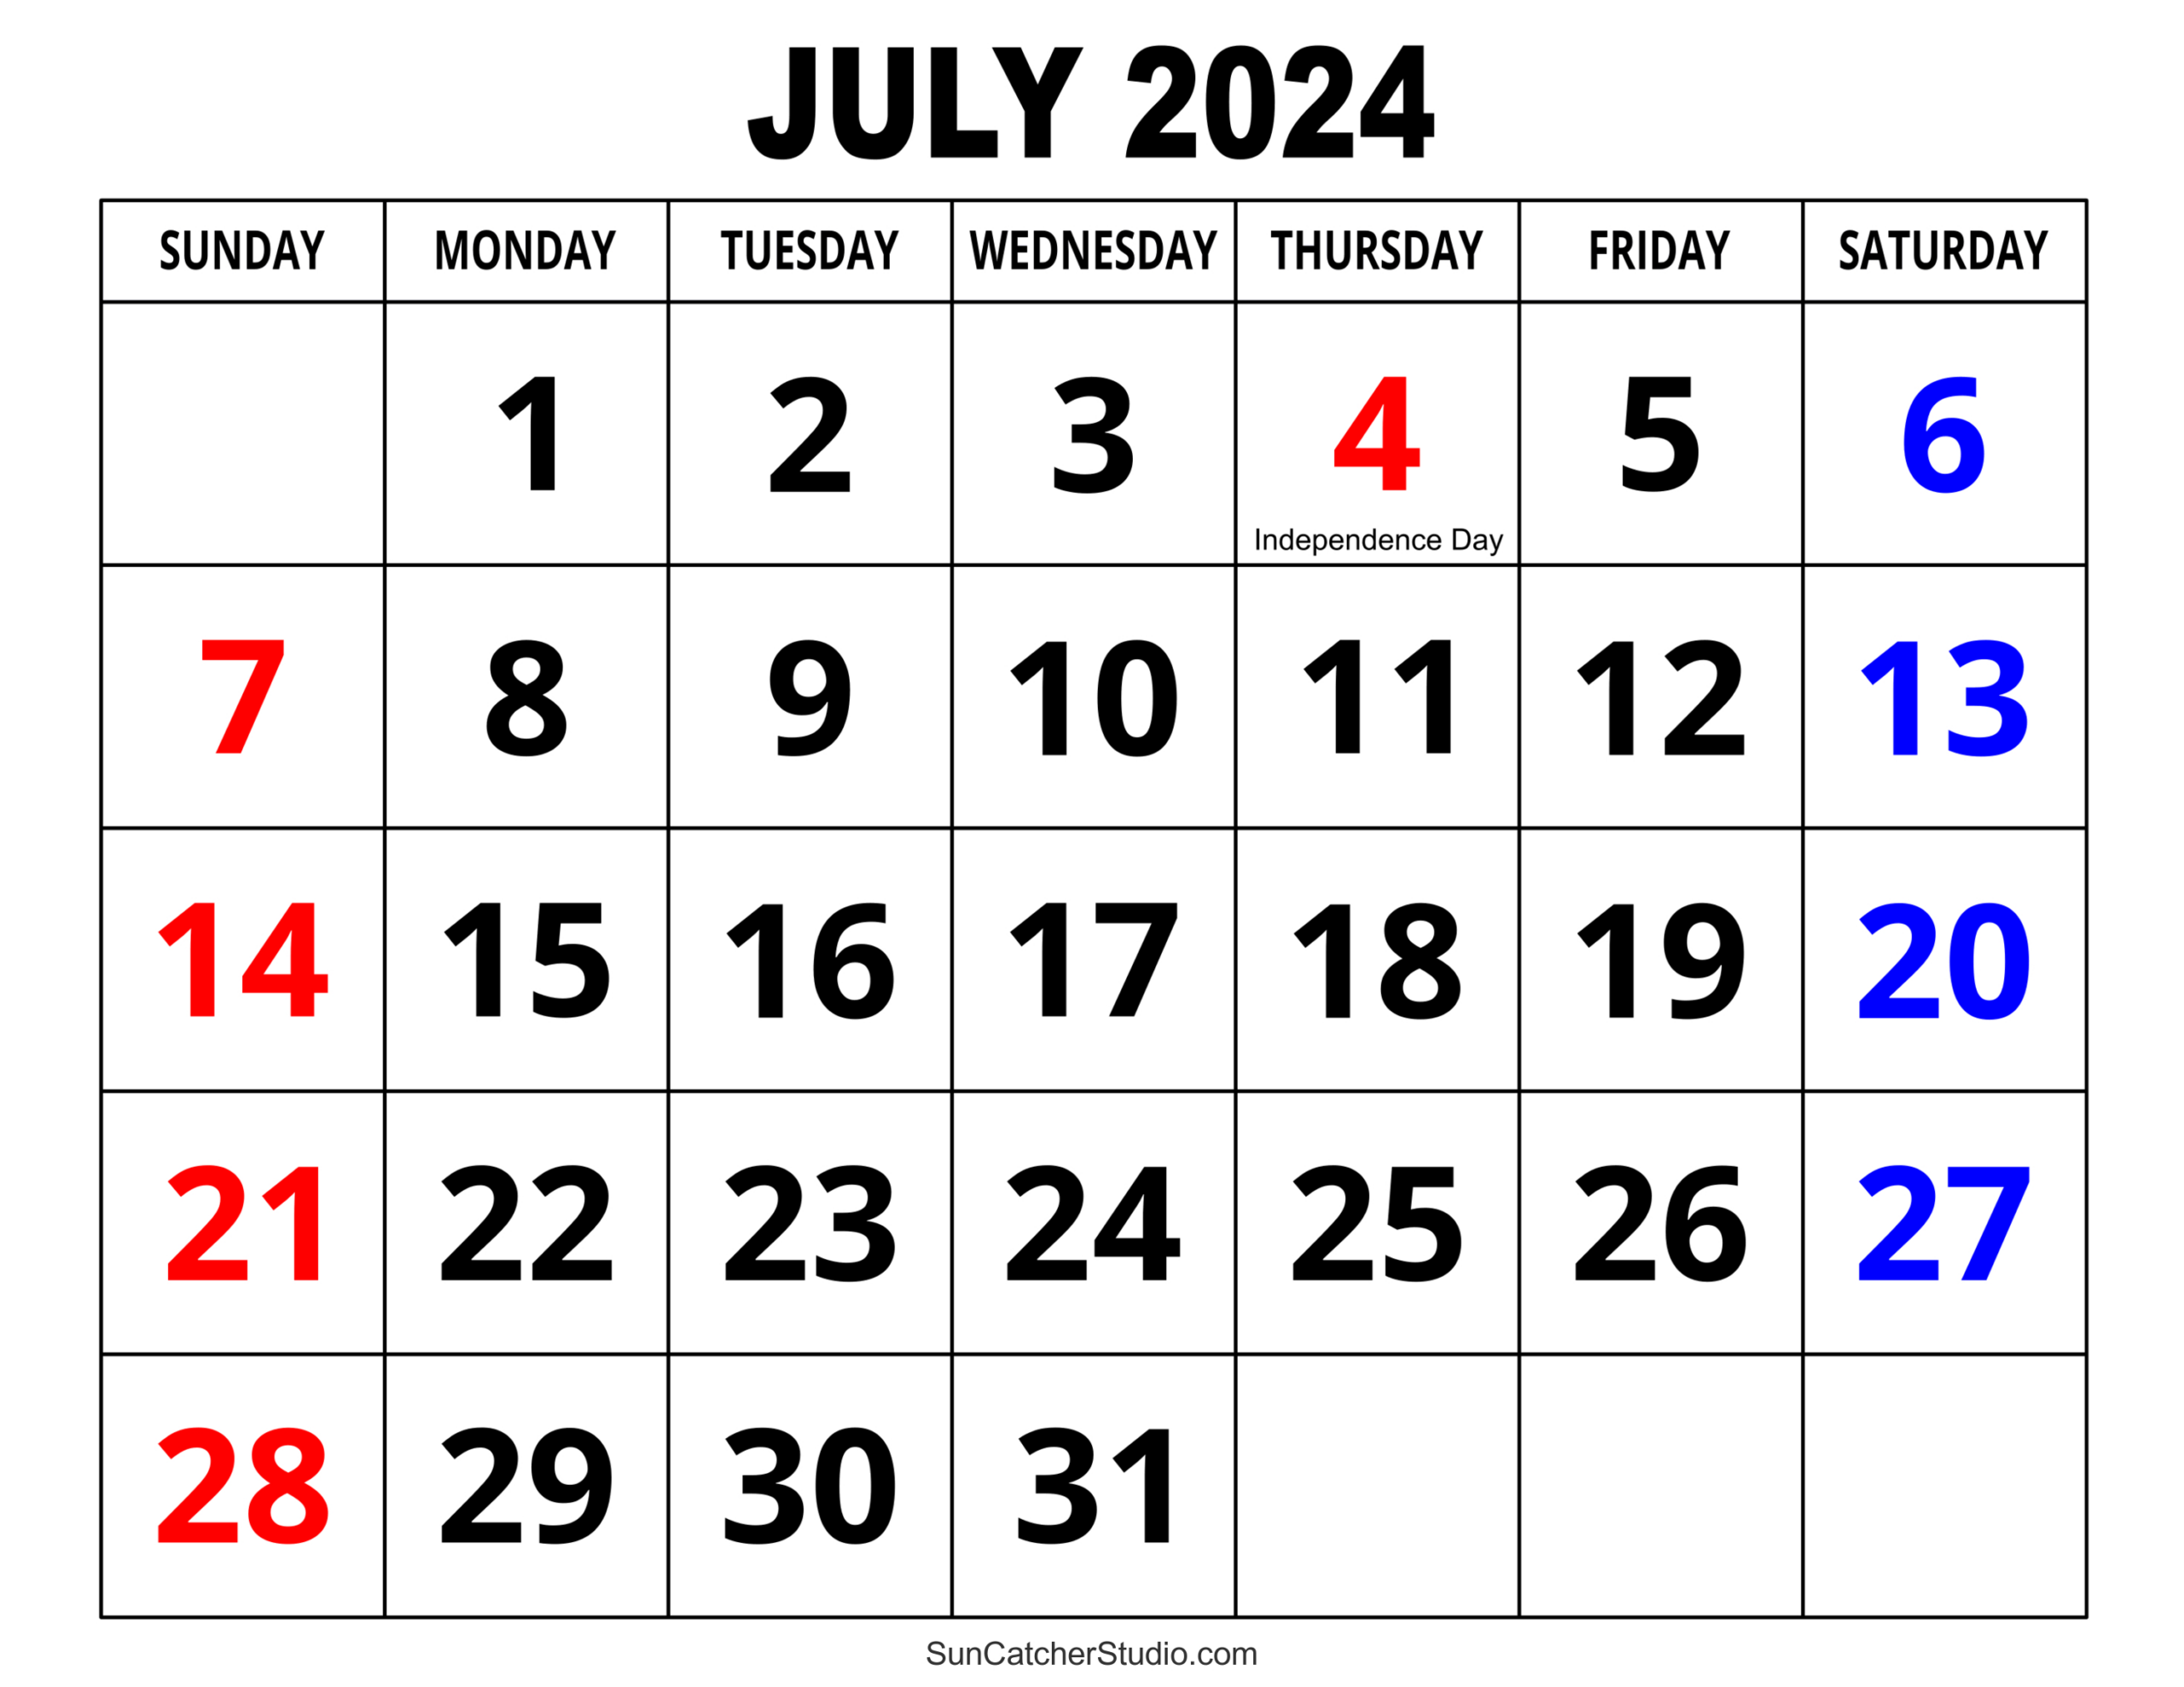 July 2024 Calendar (Free Printable) – Diy Projects, Patterns | 30 July 2024 Calendar Printable